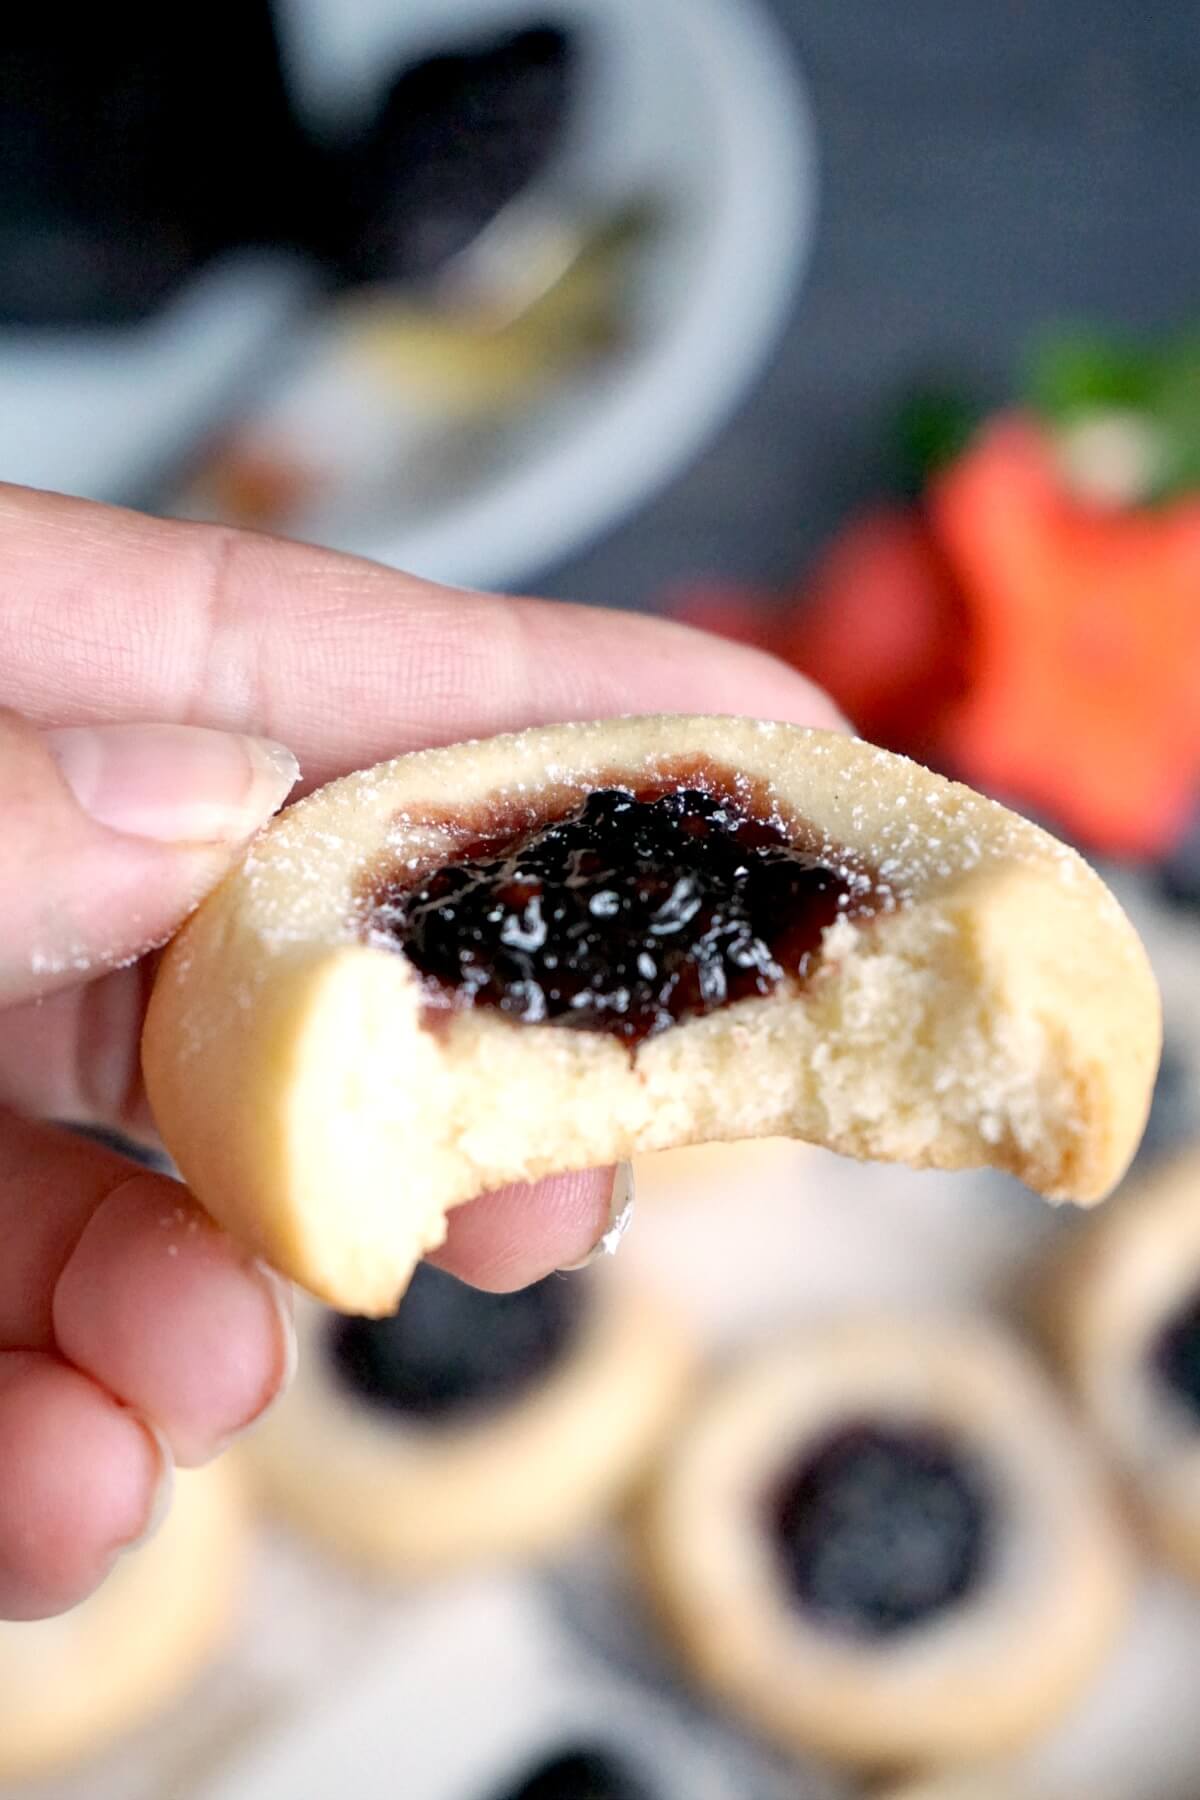 Half of a thumbprint cookie to show how it looks like inside.